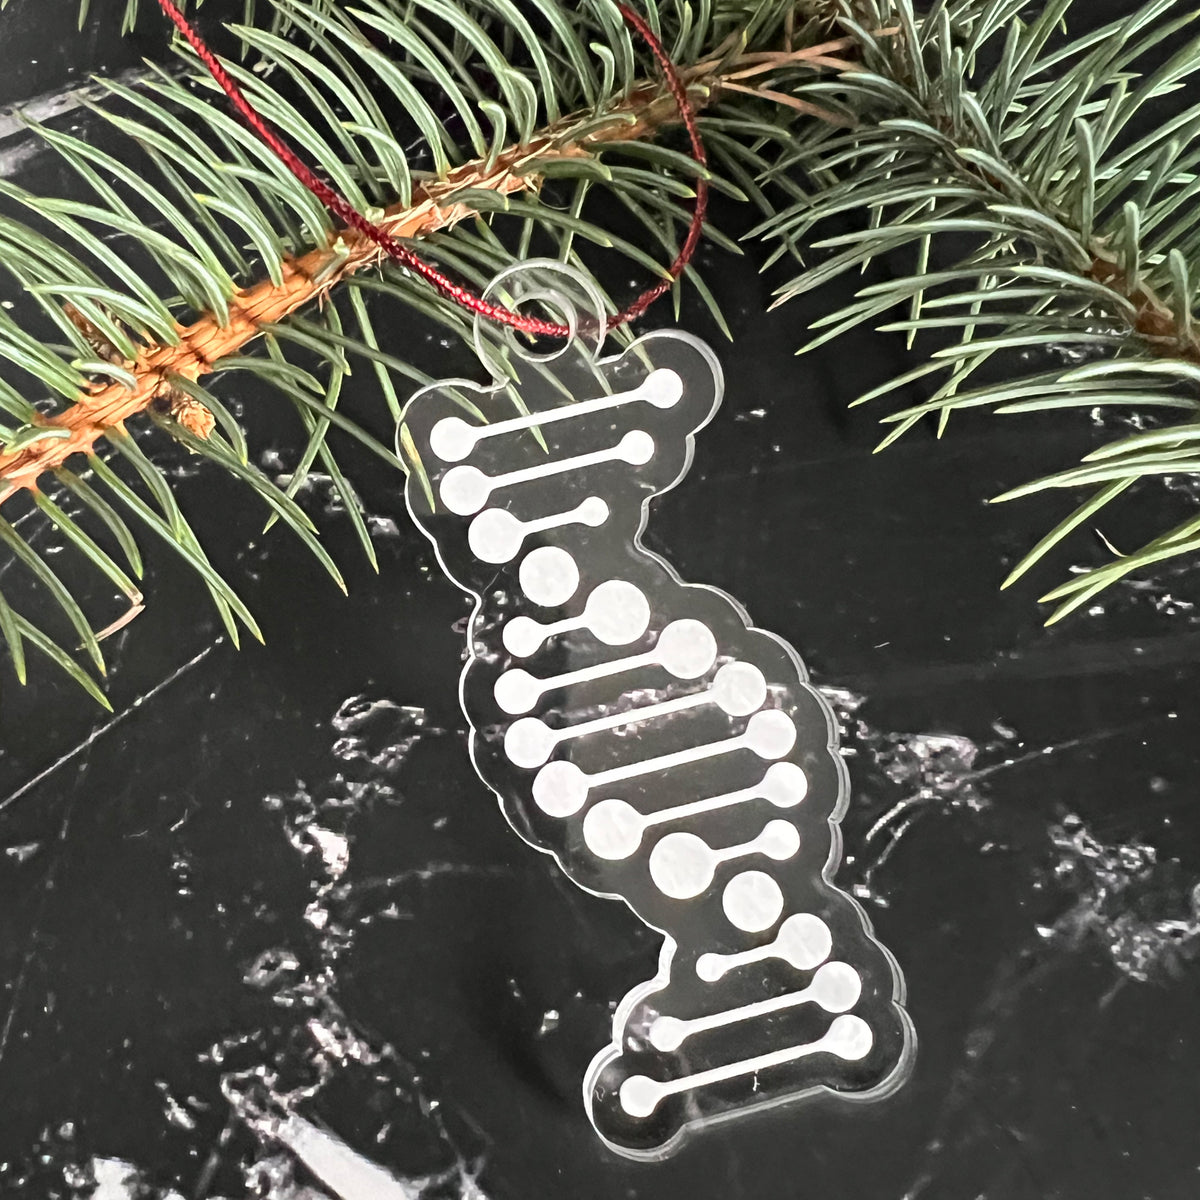 DNA Double Helix Christmas Ornament - Great gift for teachers, students and scientists in chemistry, biology, molecular biology